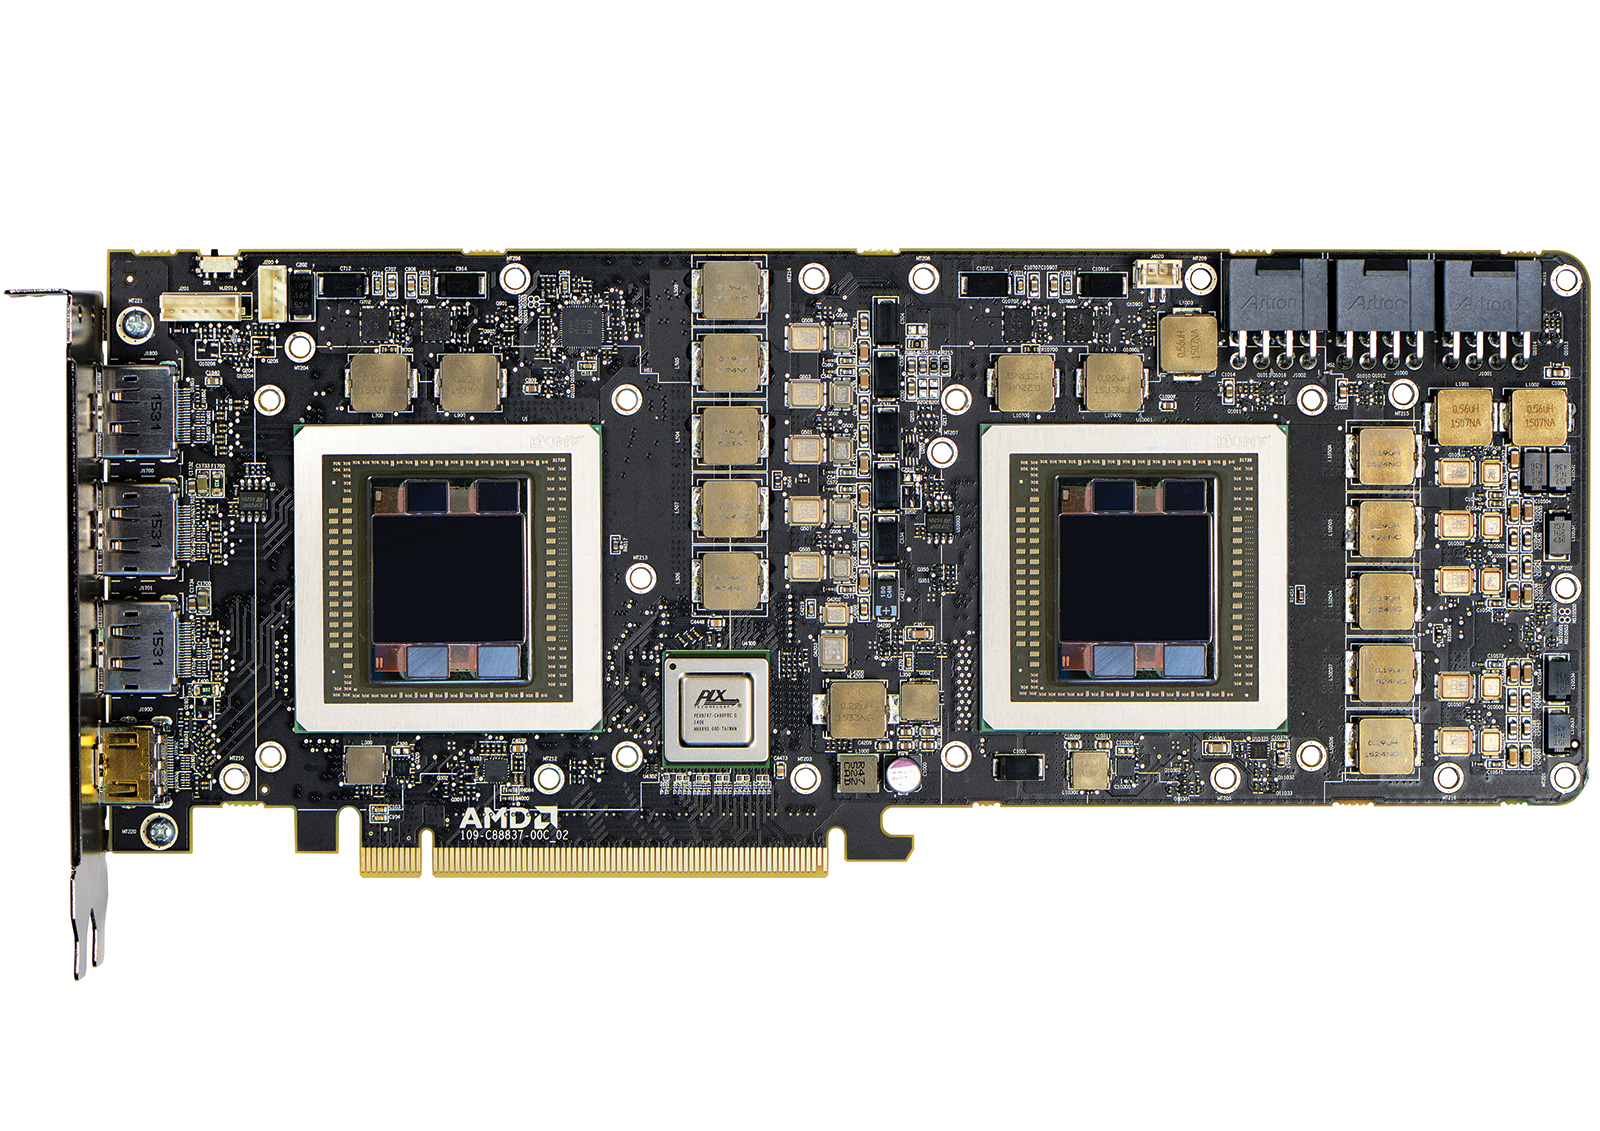 https://www.techpowerup.com/reviews/AMD/Radeon_Pro_Duo_Preview/images/pcb2.jpg